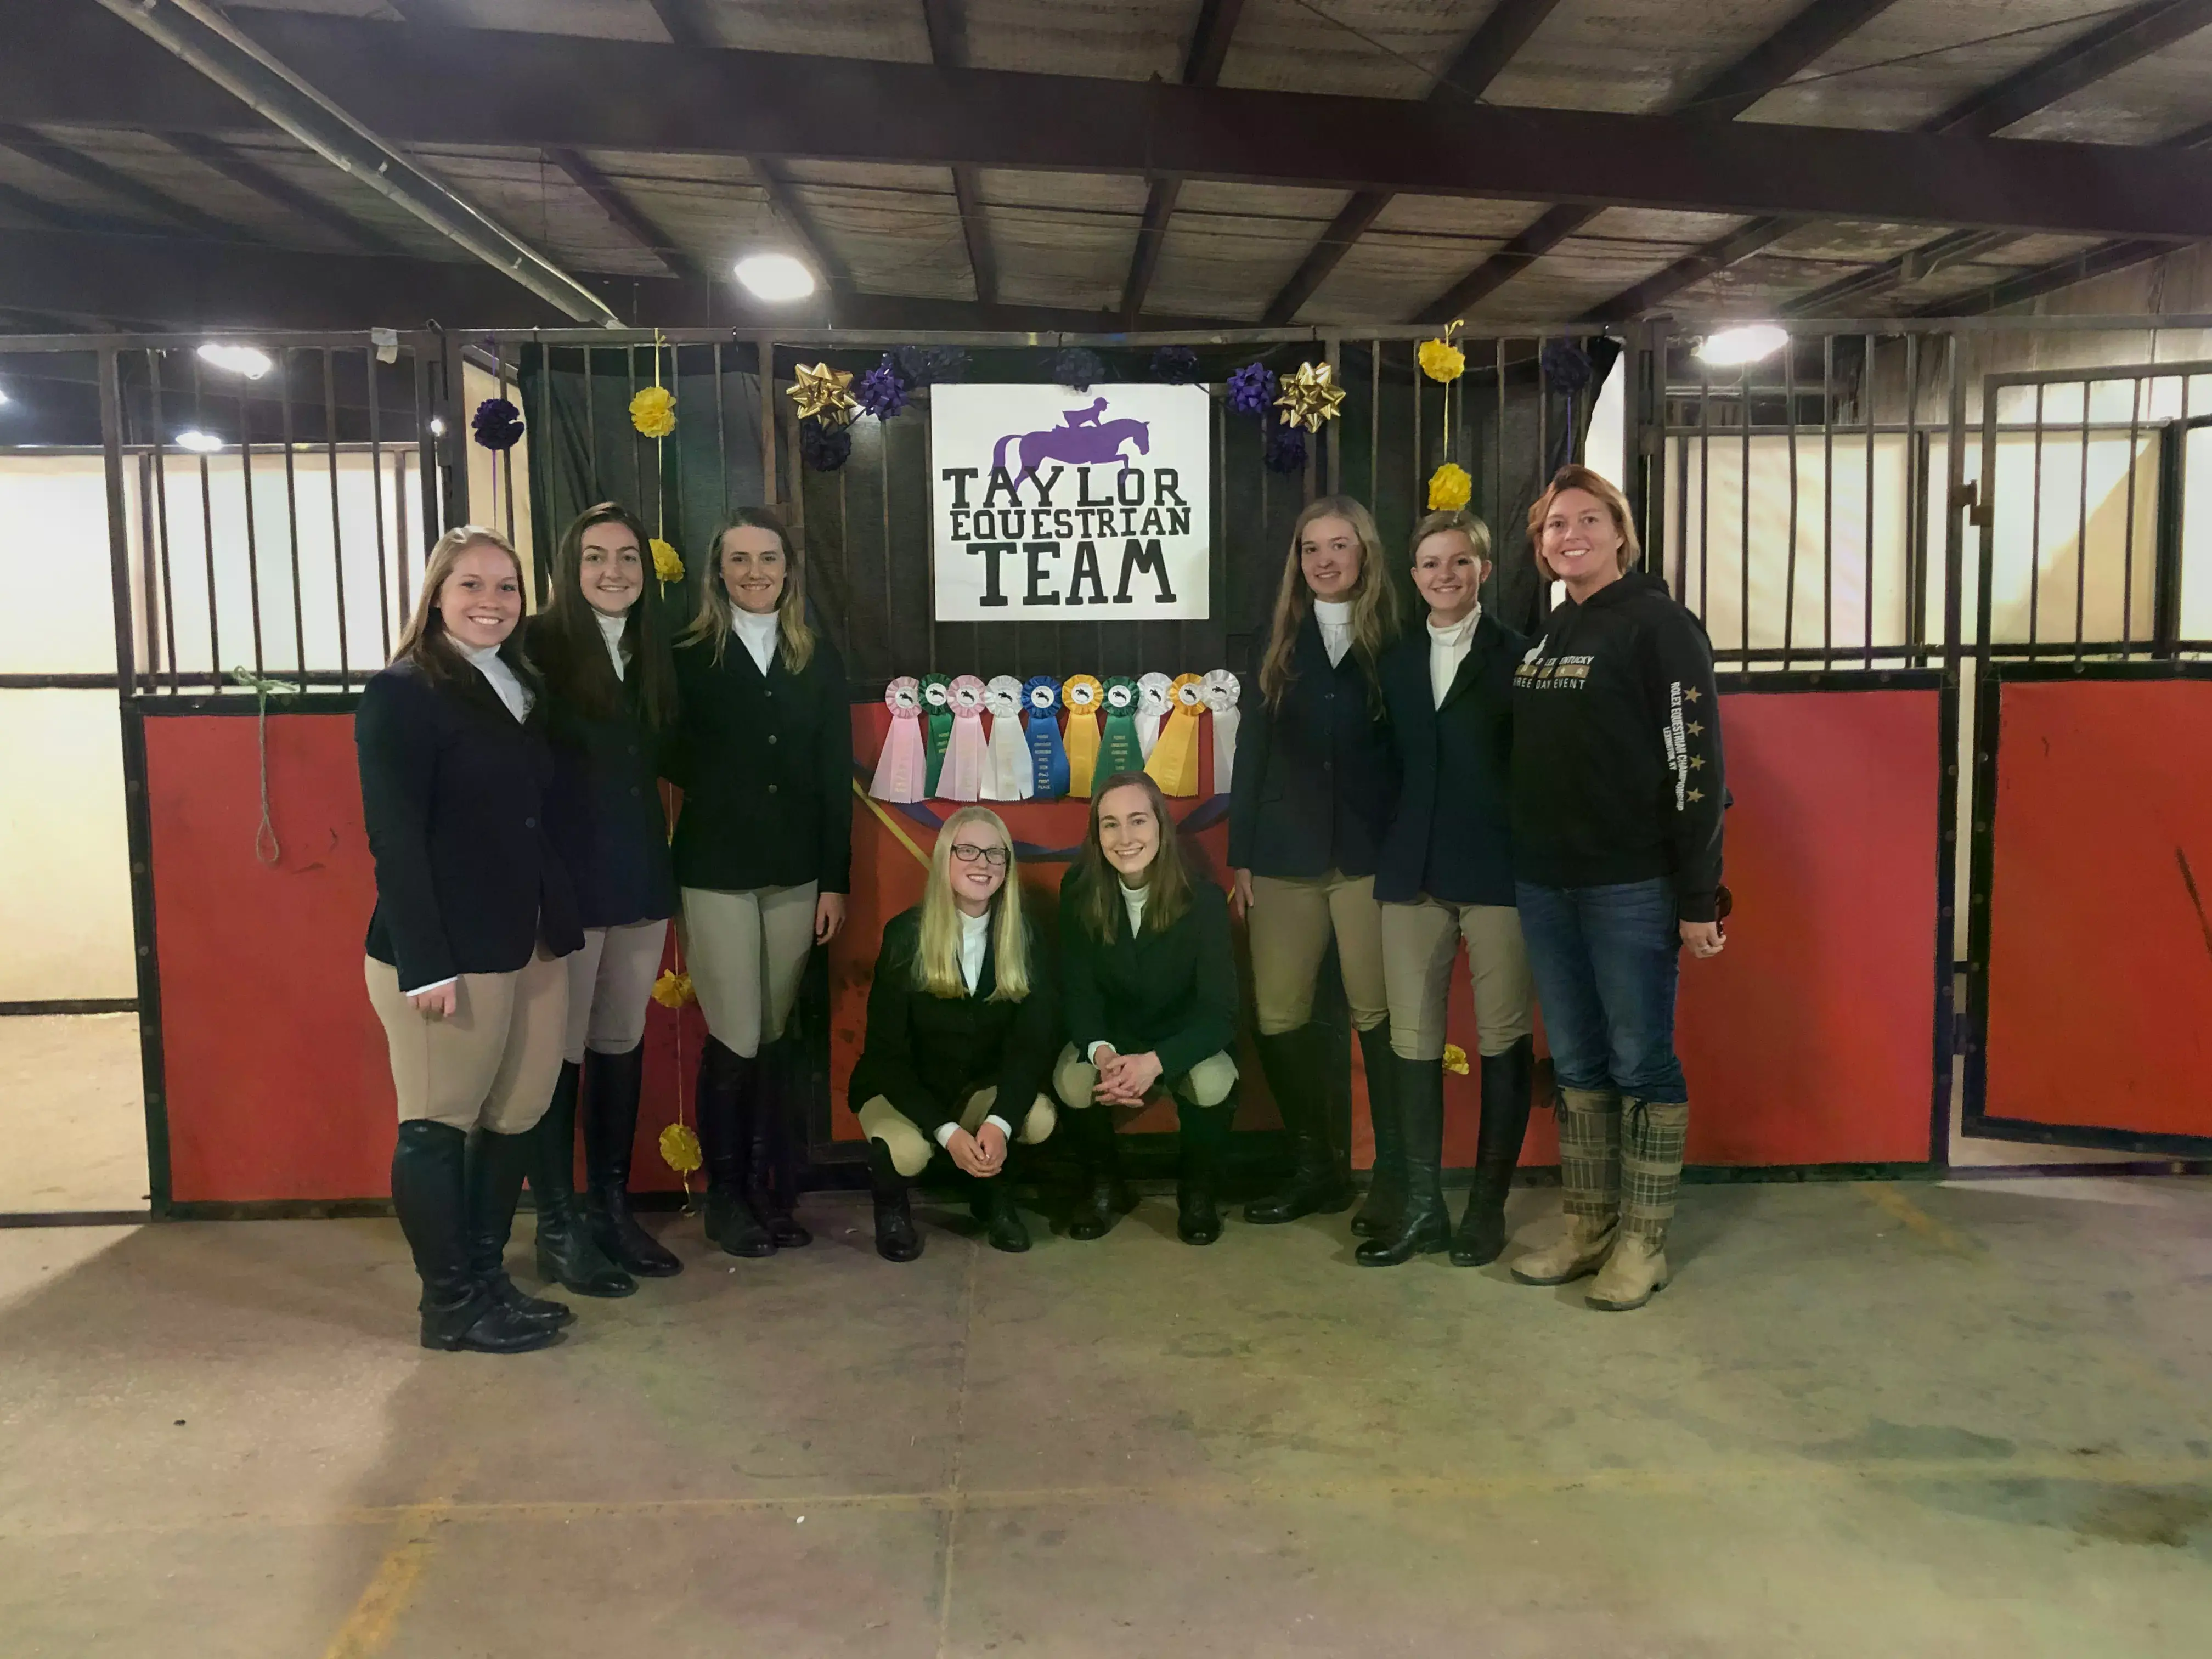 The Taylor Equestrian Team standing in the stable with all their ribbons